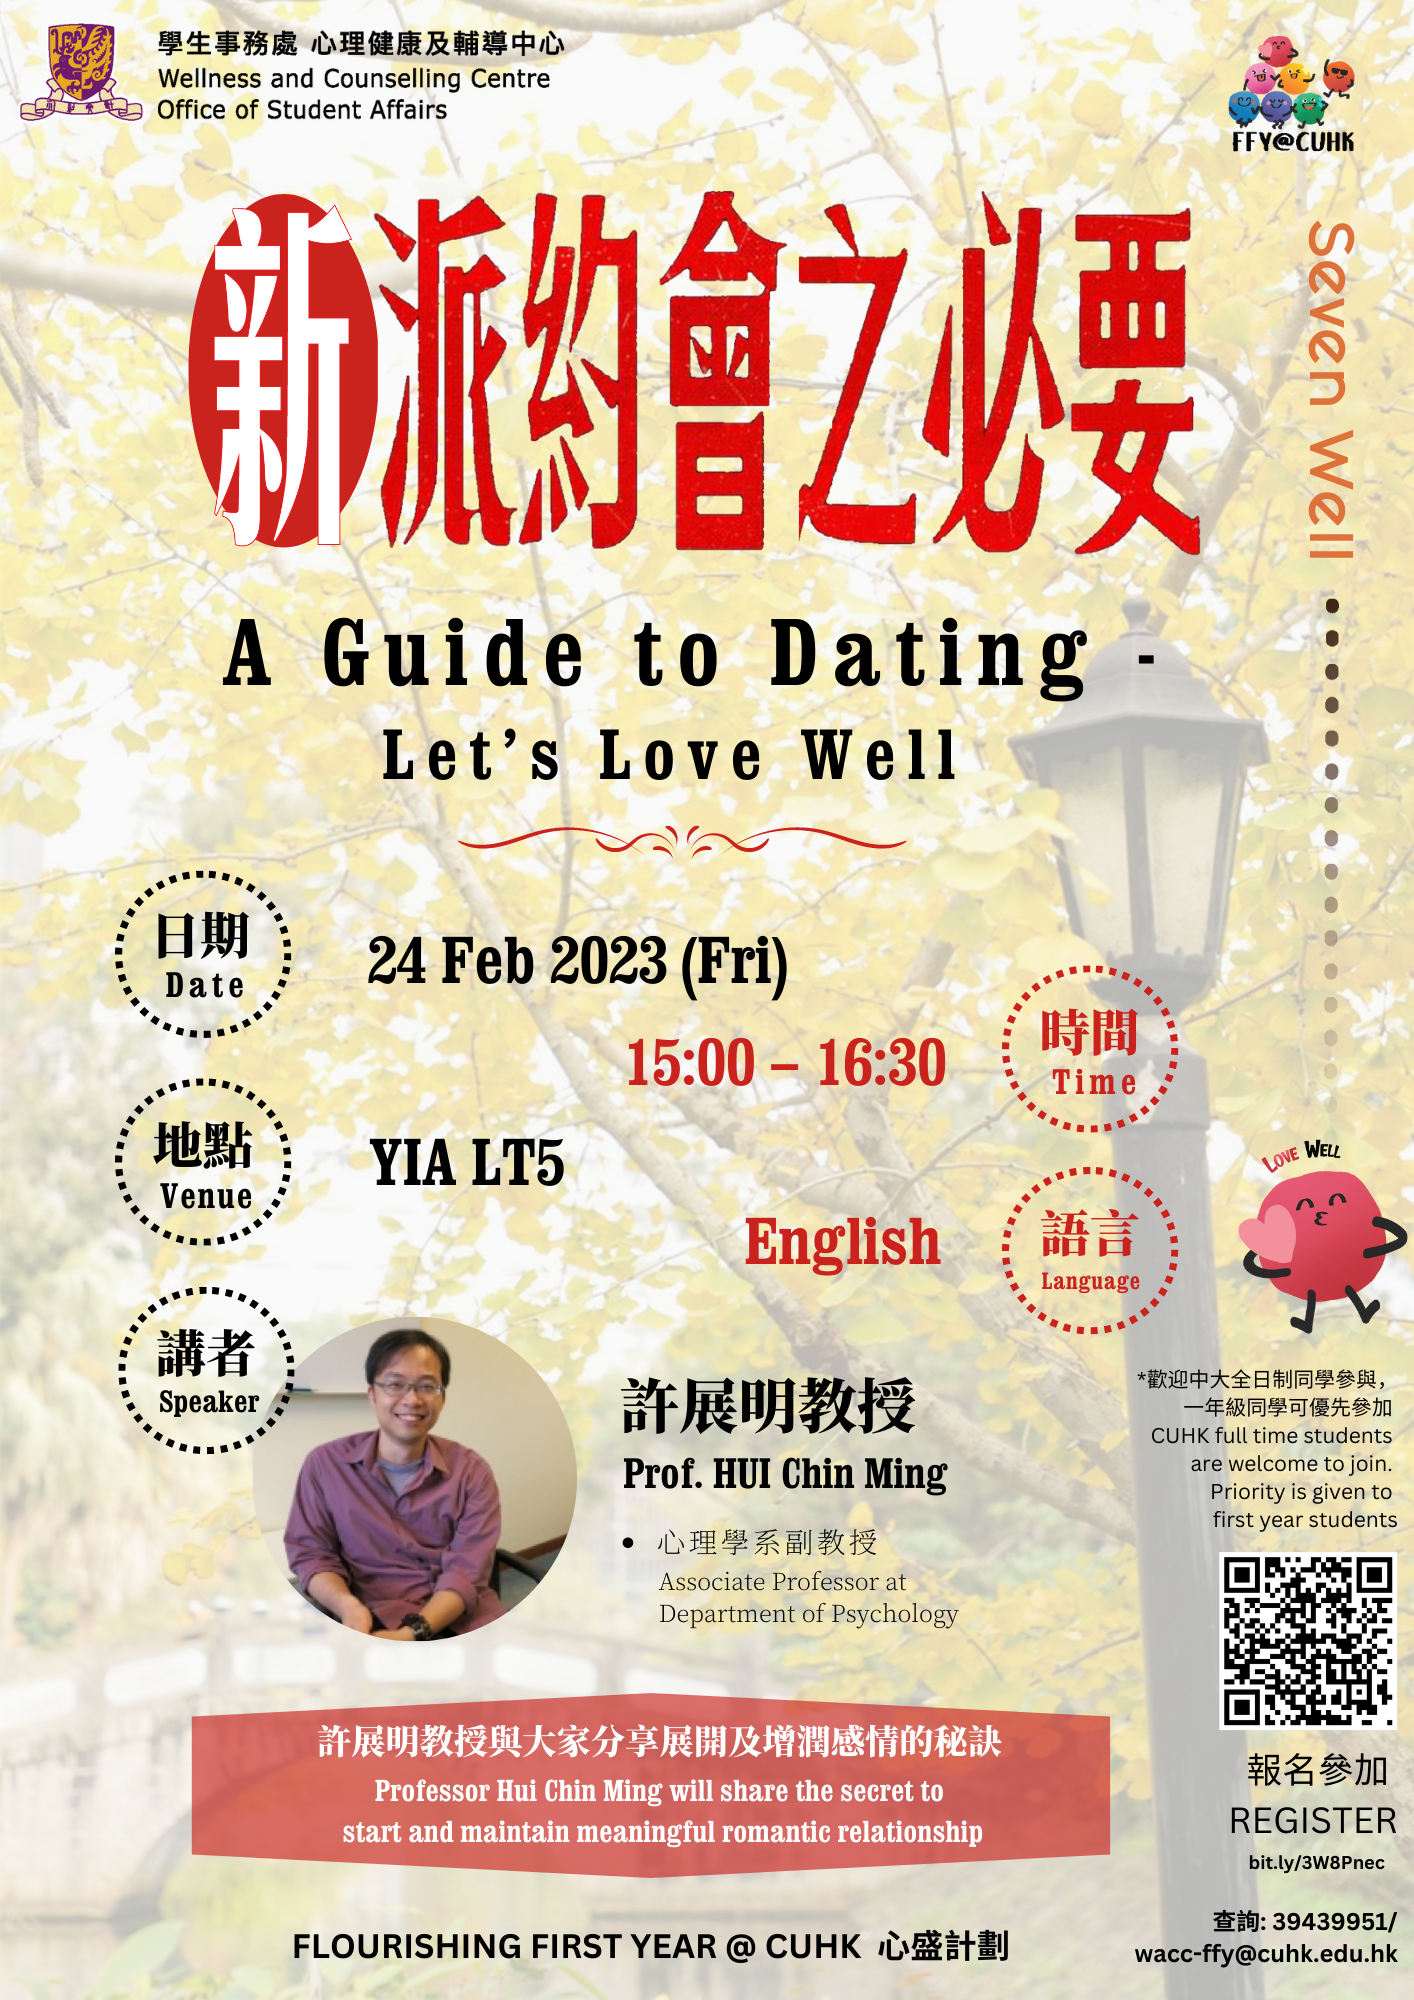 [Flourishing First Year @ CUHK] A Guide to Dating – Let’s Love Well